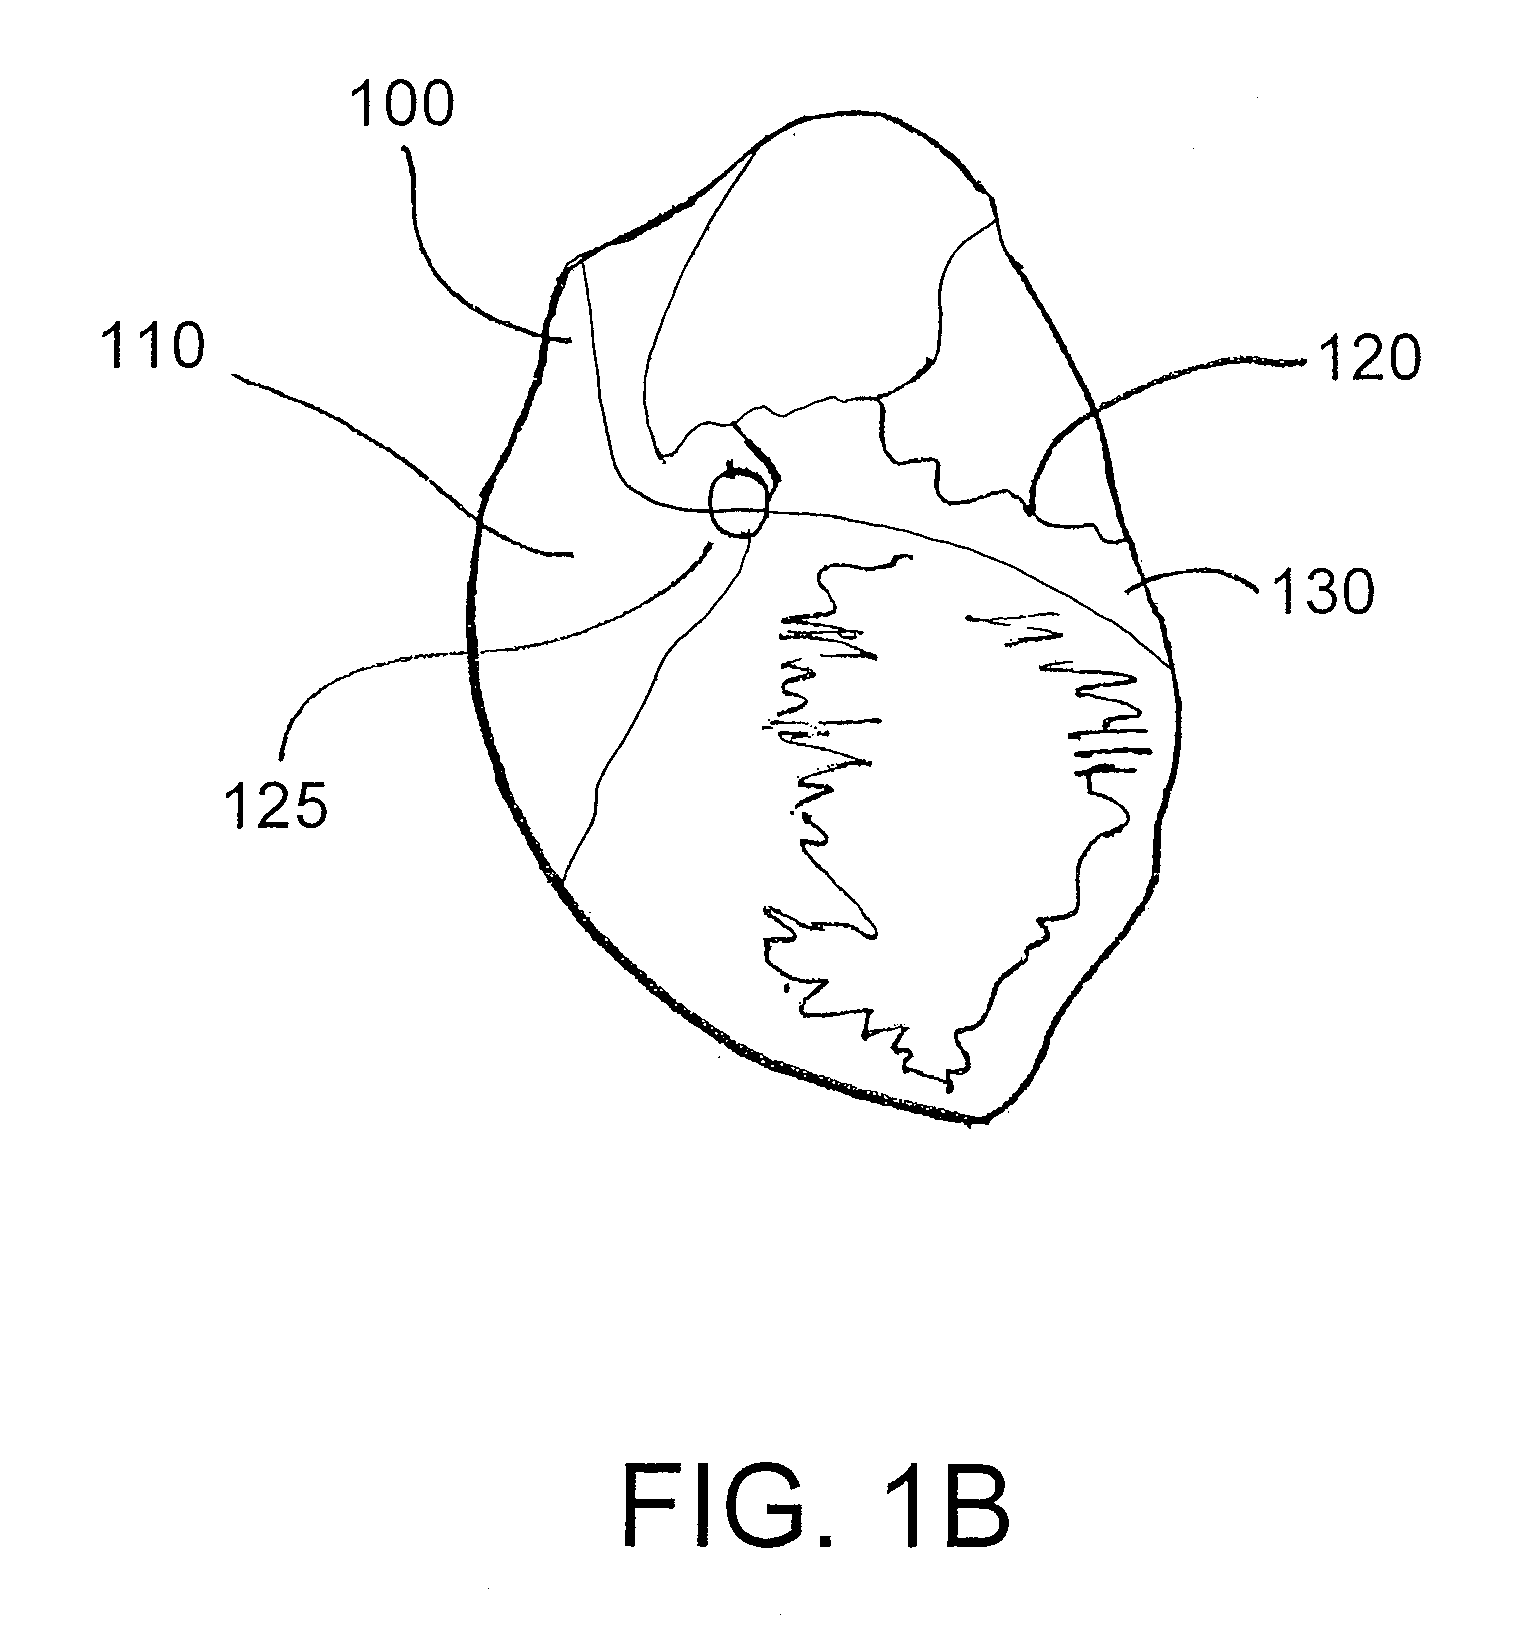 Devices for accessing the pericardial space surrounding the heart